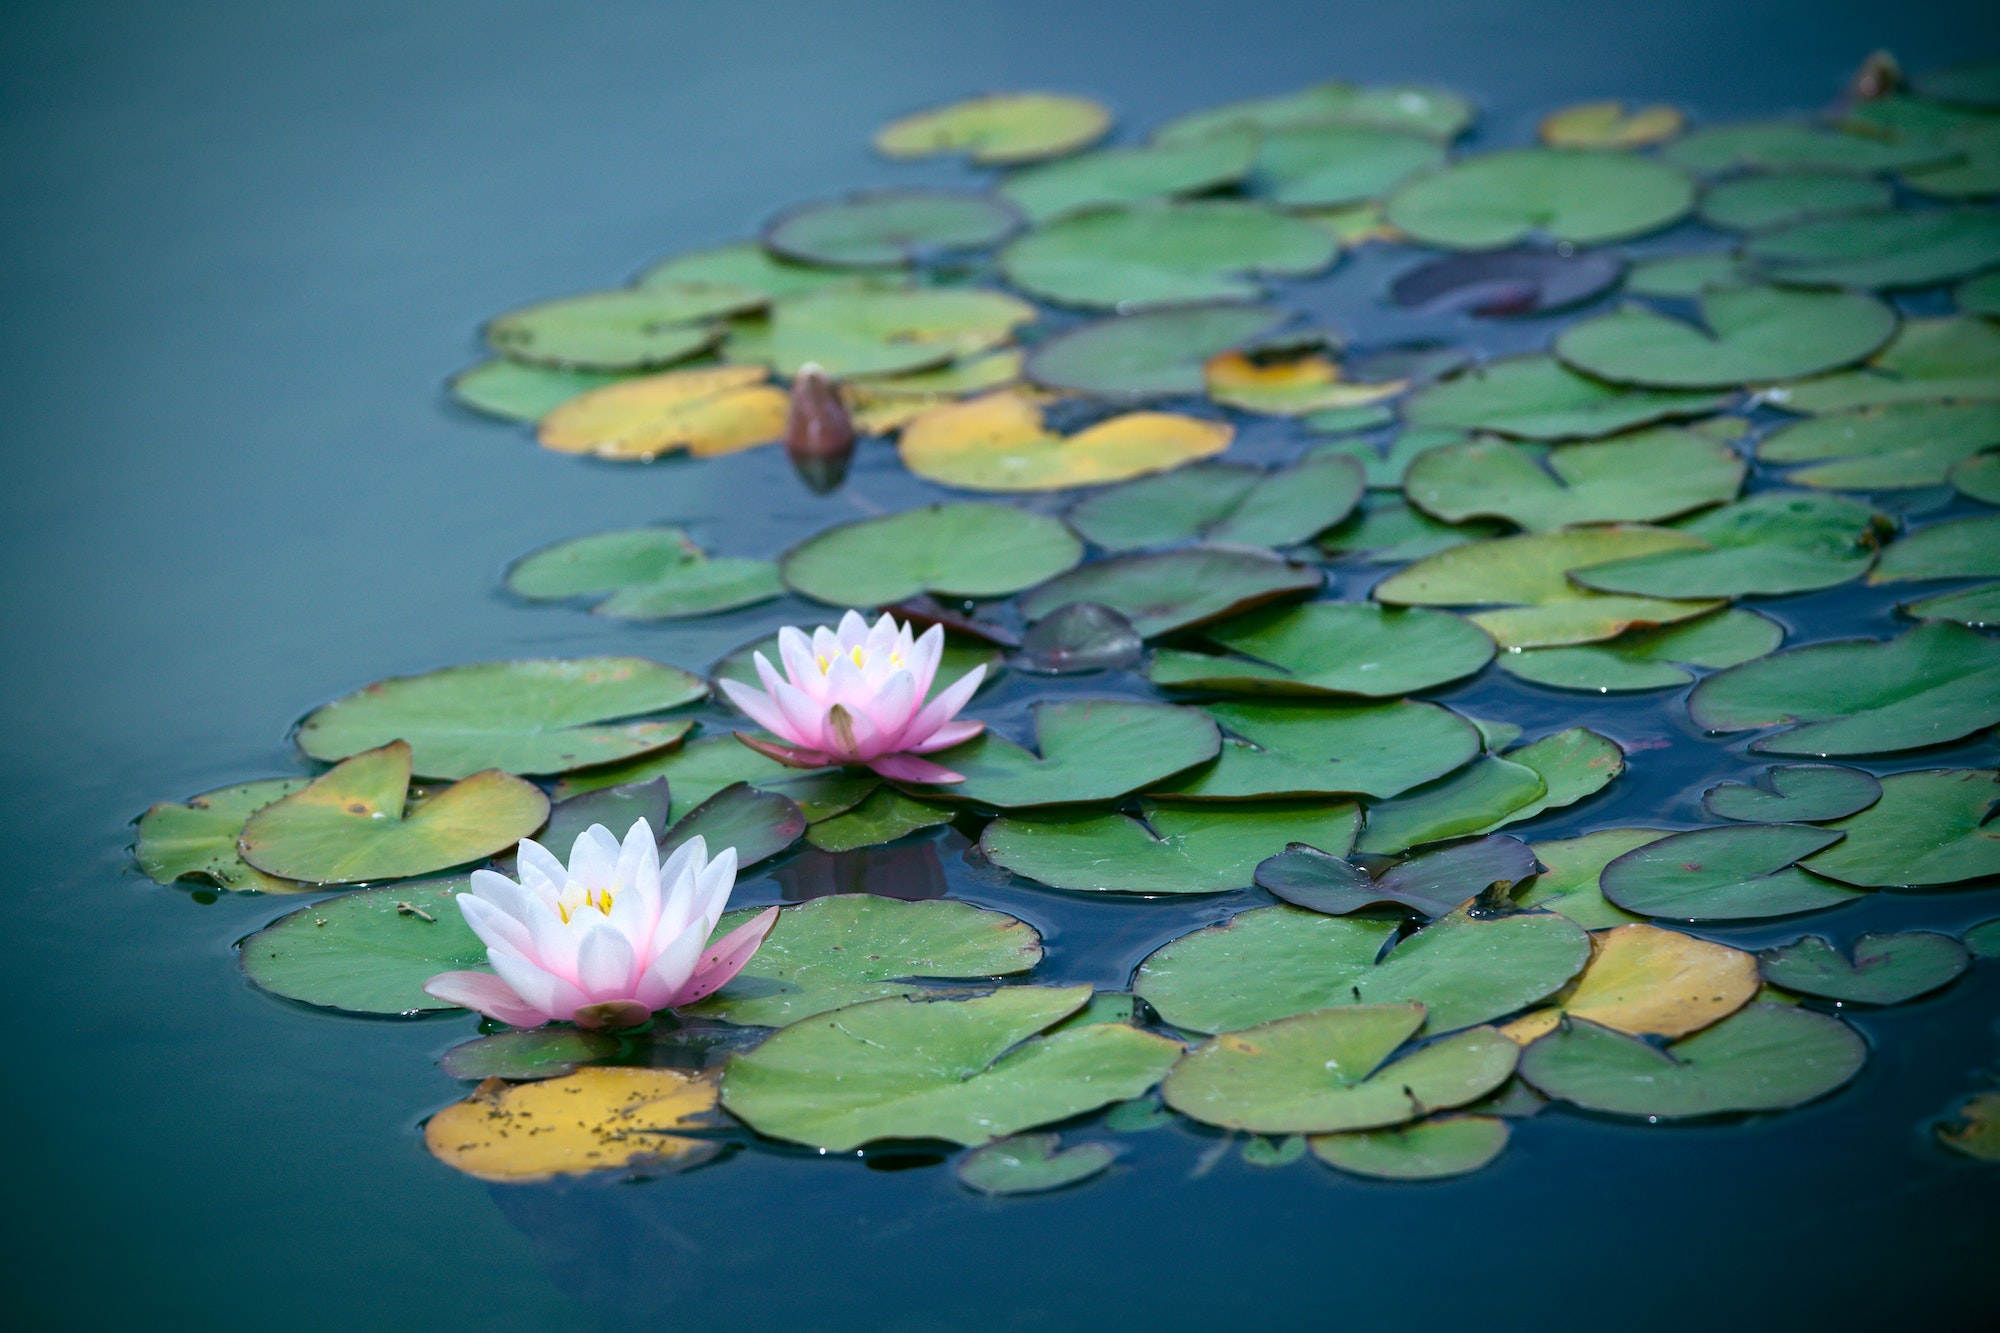 Waterlilies in the pond (nominated on Feb 24)